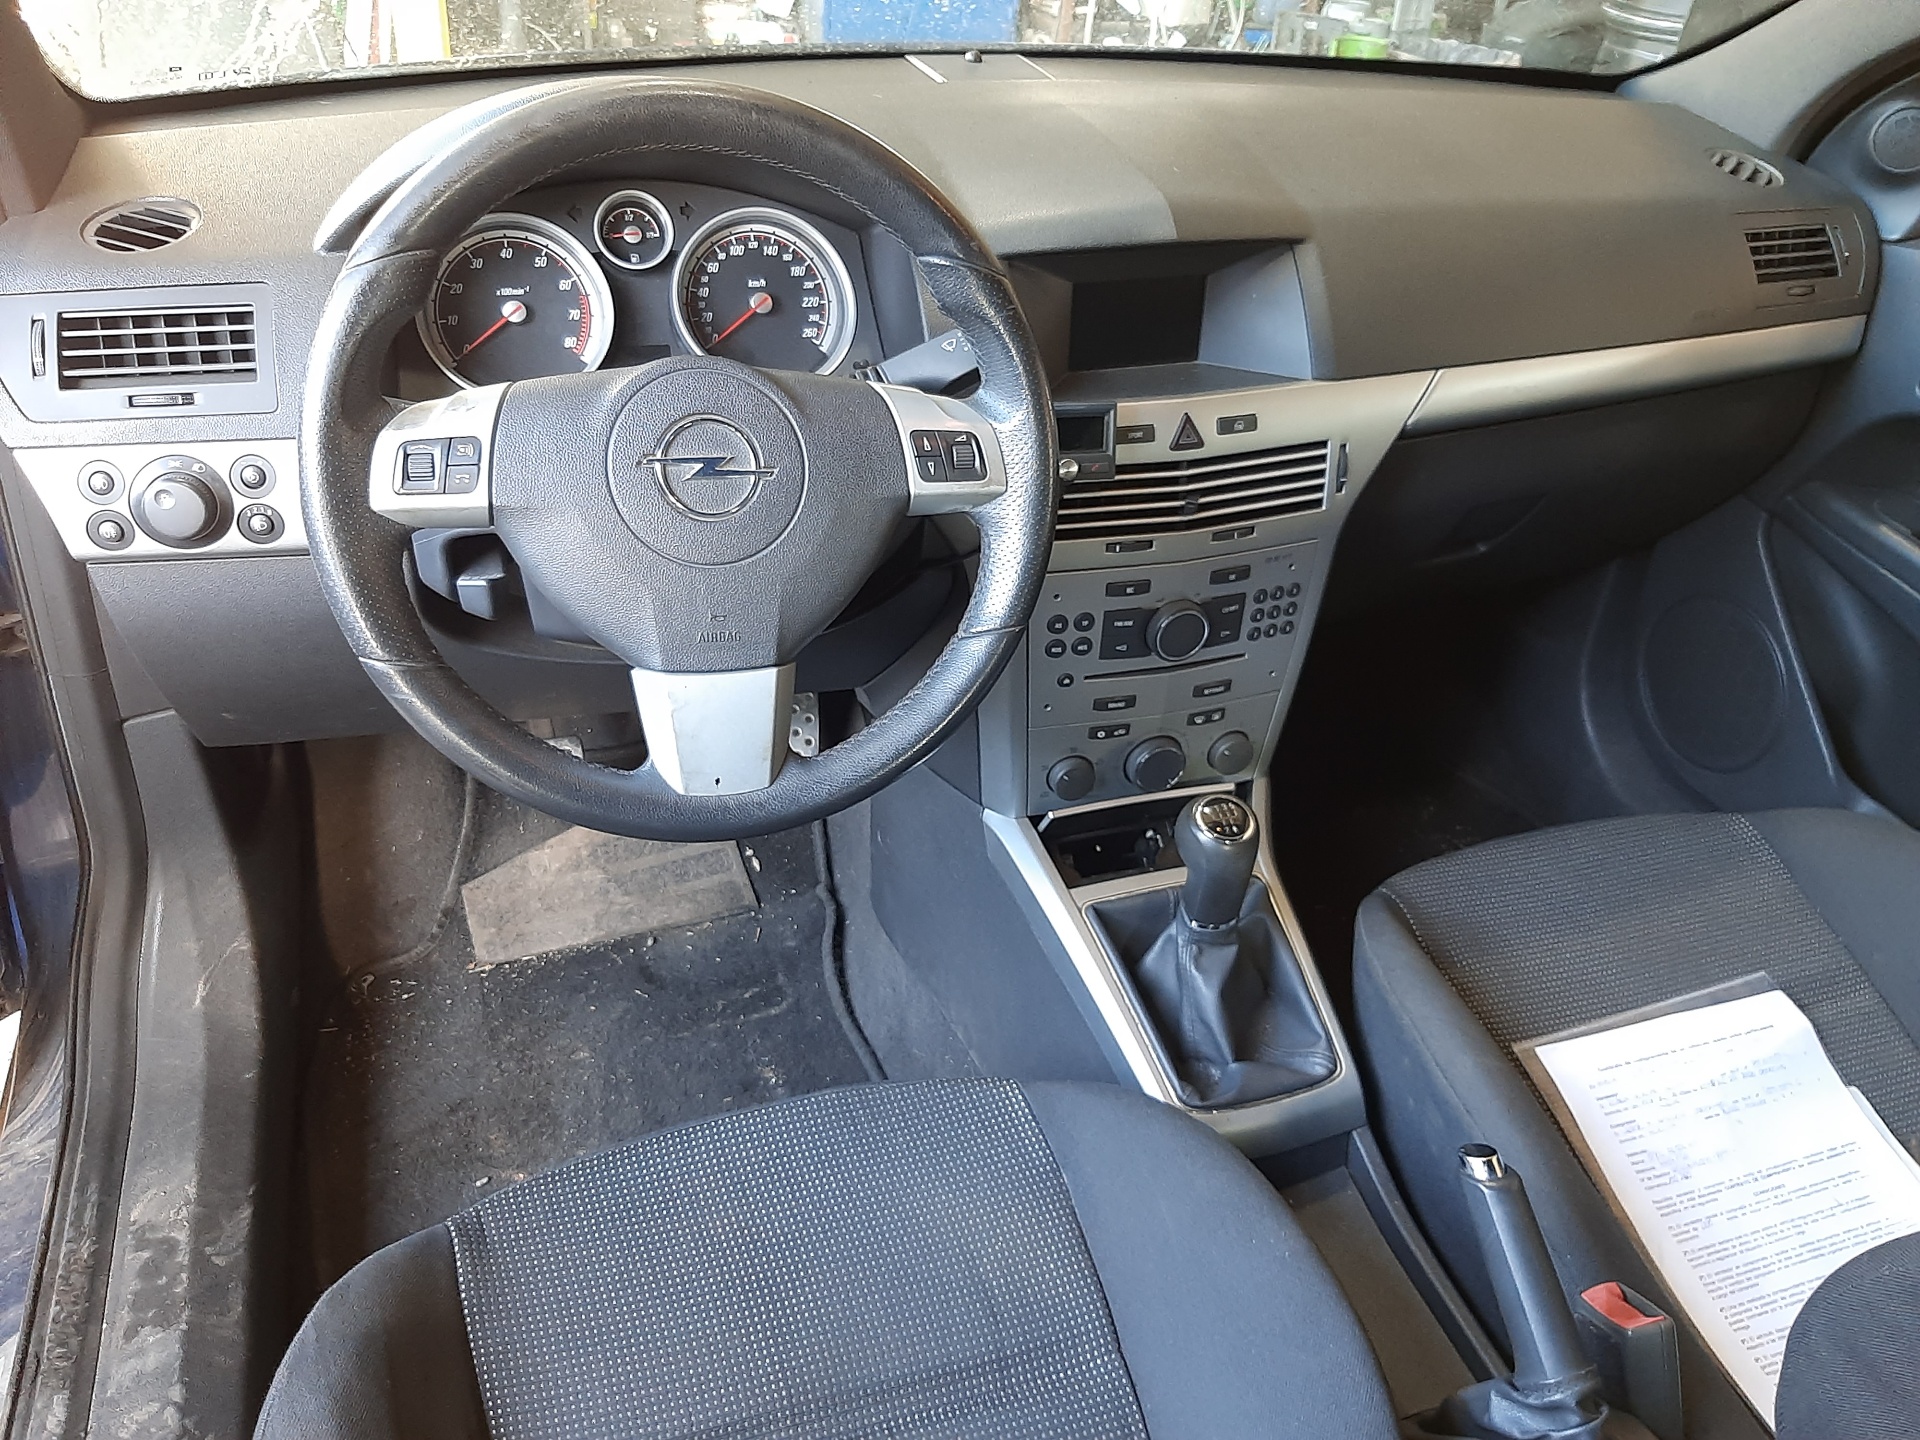 OPEL Astra H (2004-2014) Other Interior Parts 13275085 22664811